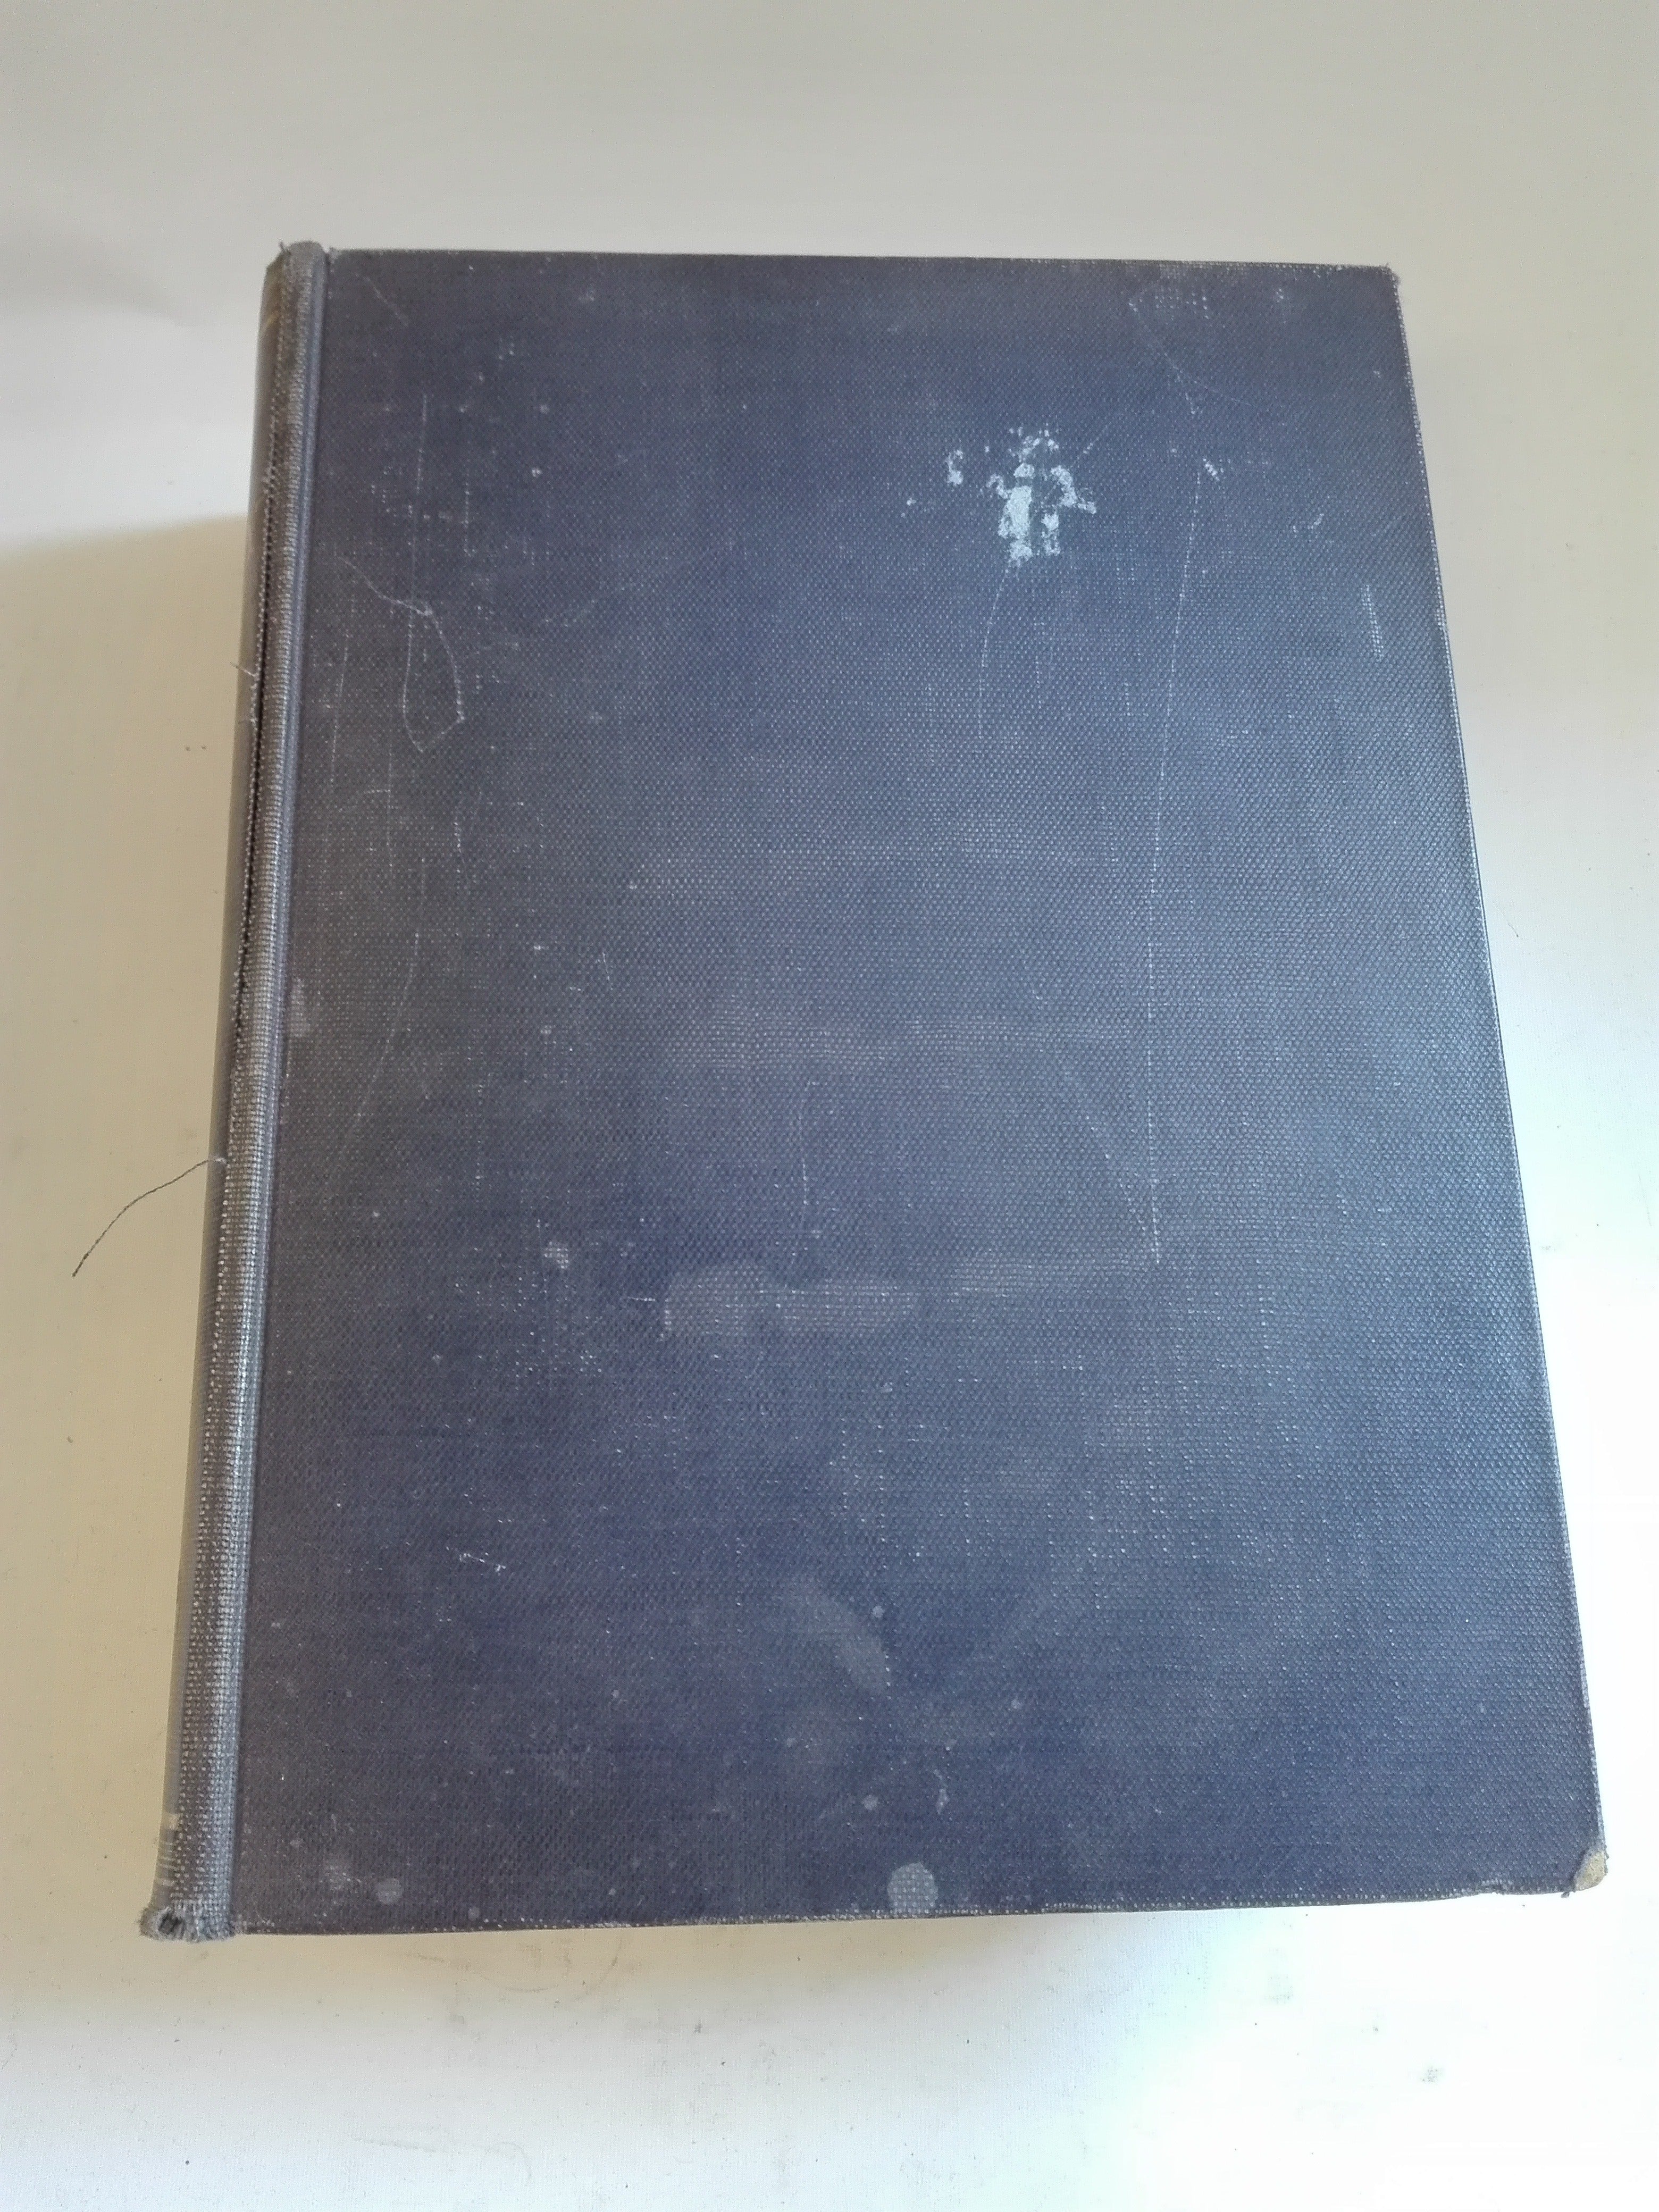 LATIN DICTIONARY BY CHARLTON T.LEWIS/CHARLES SHORT/ROME/SCARCE 1958